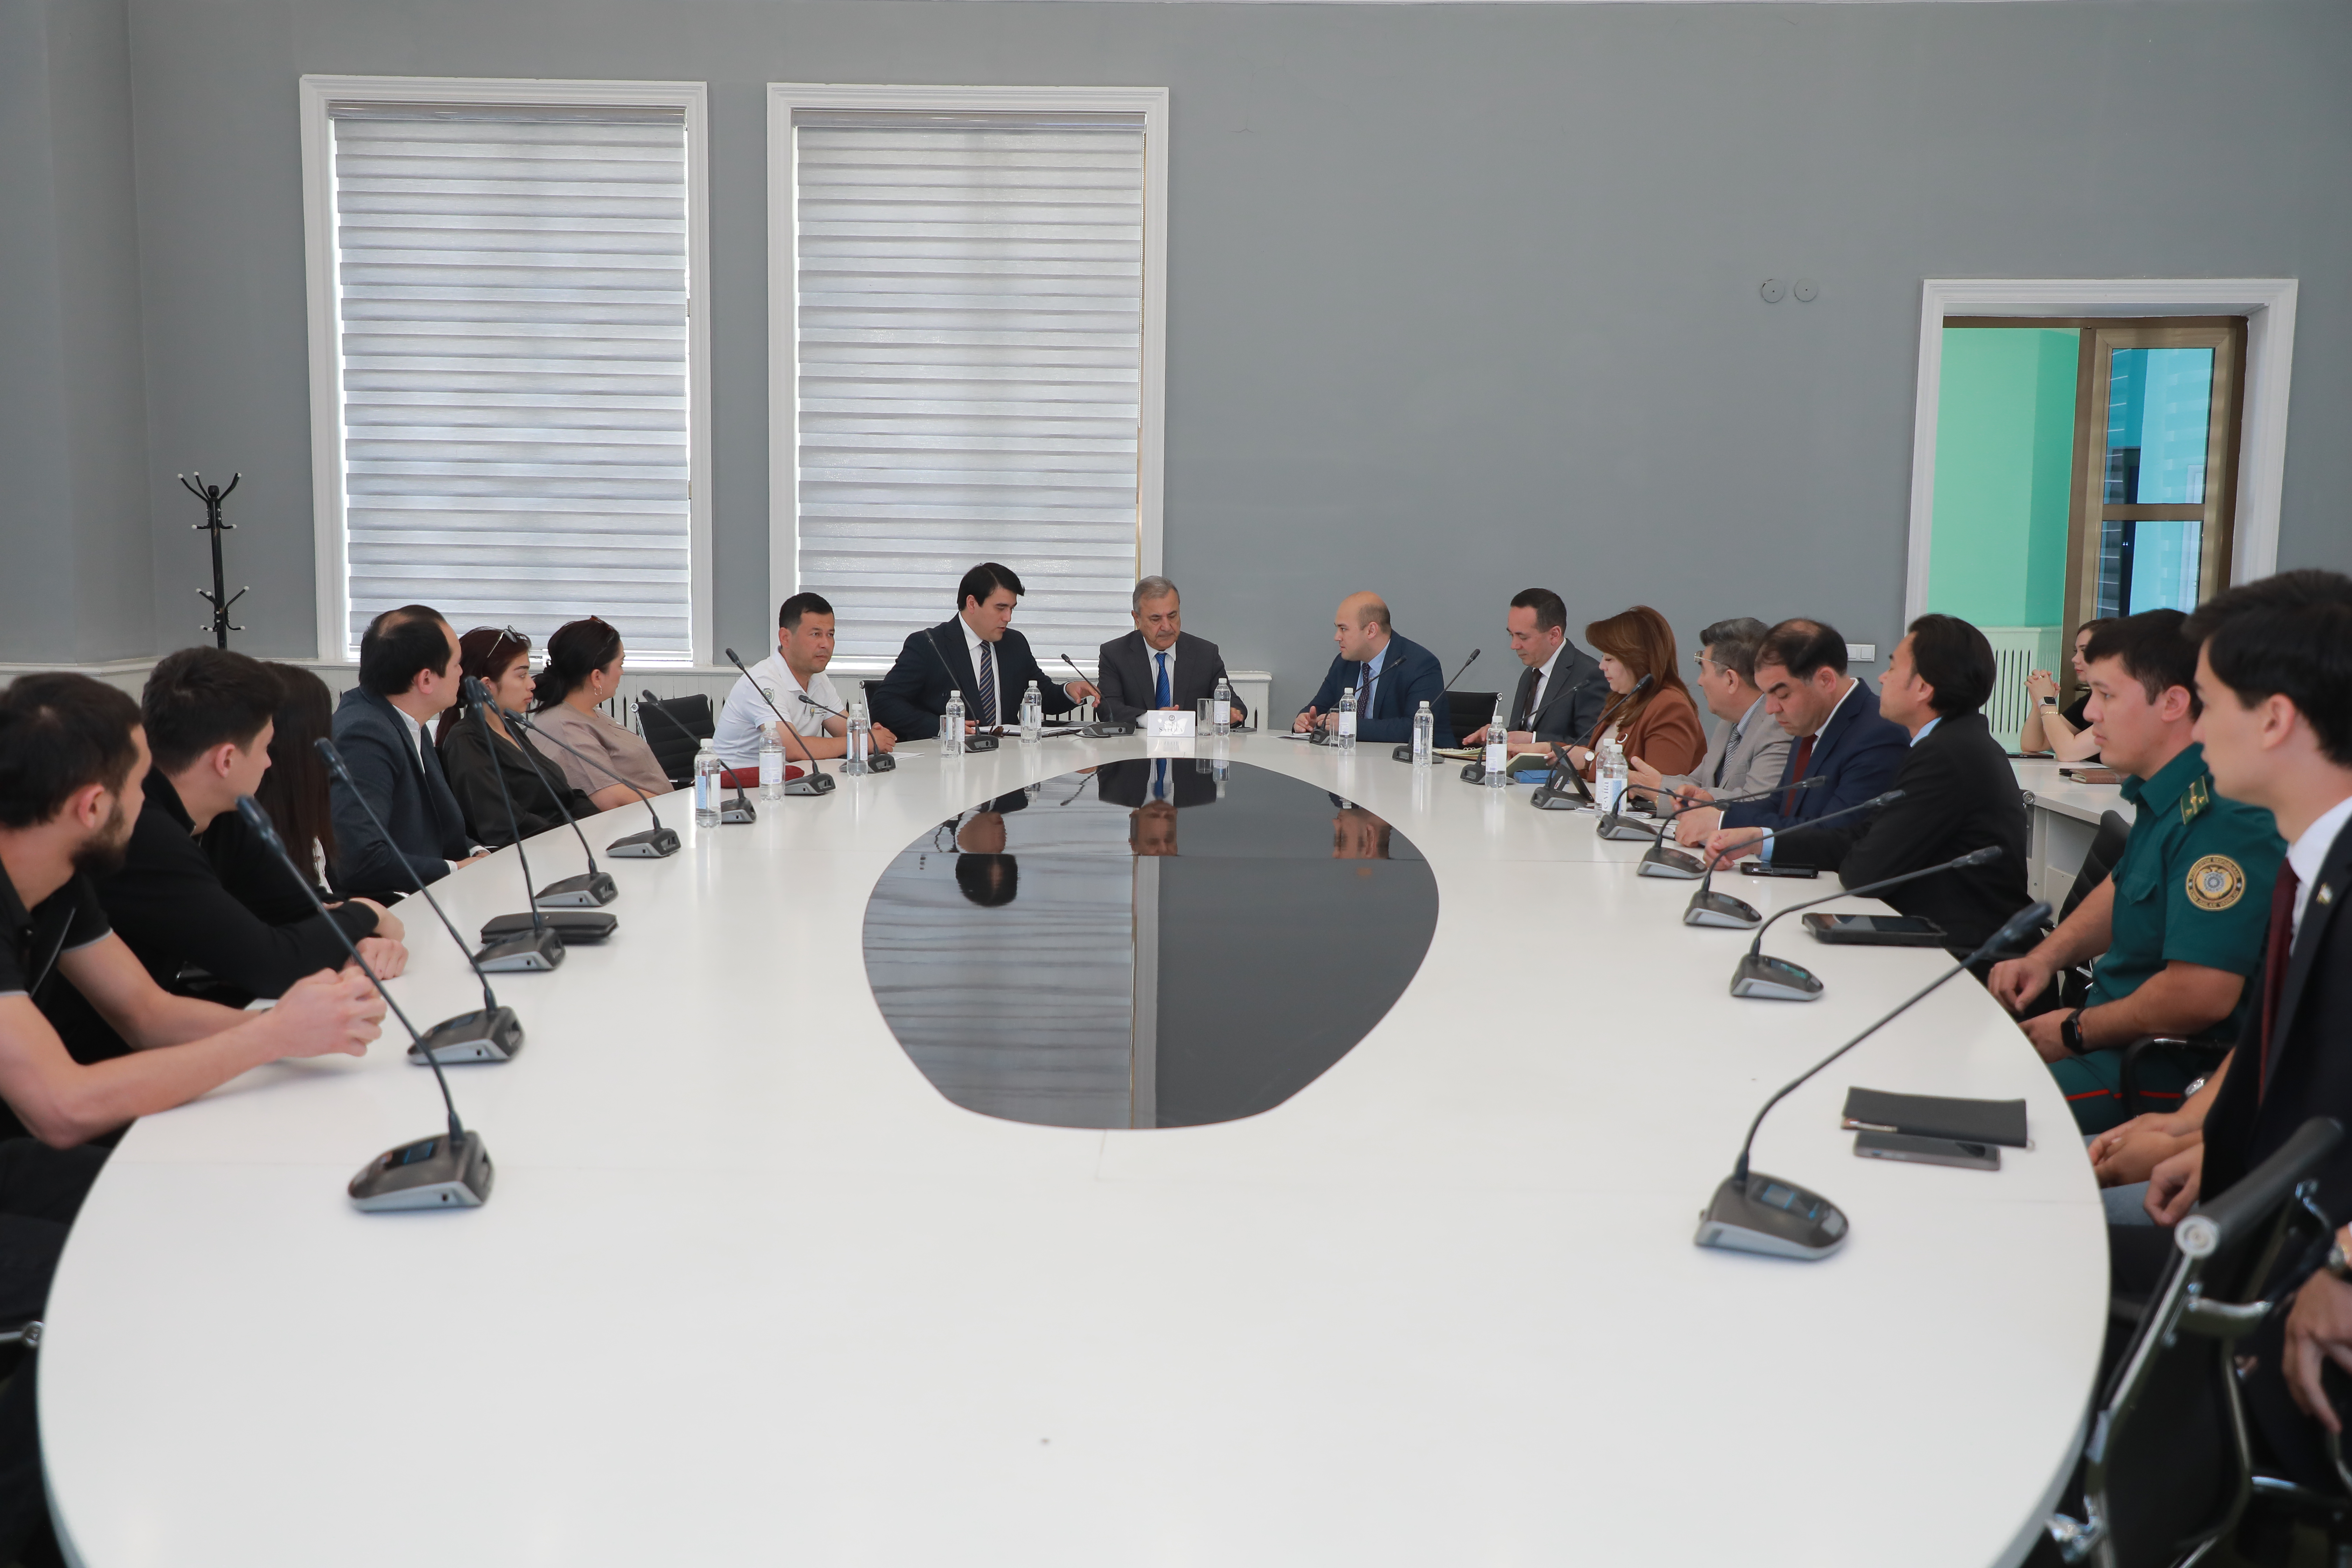 A meeting “Rector and youth” was held